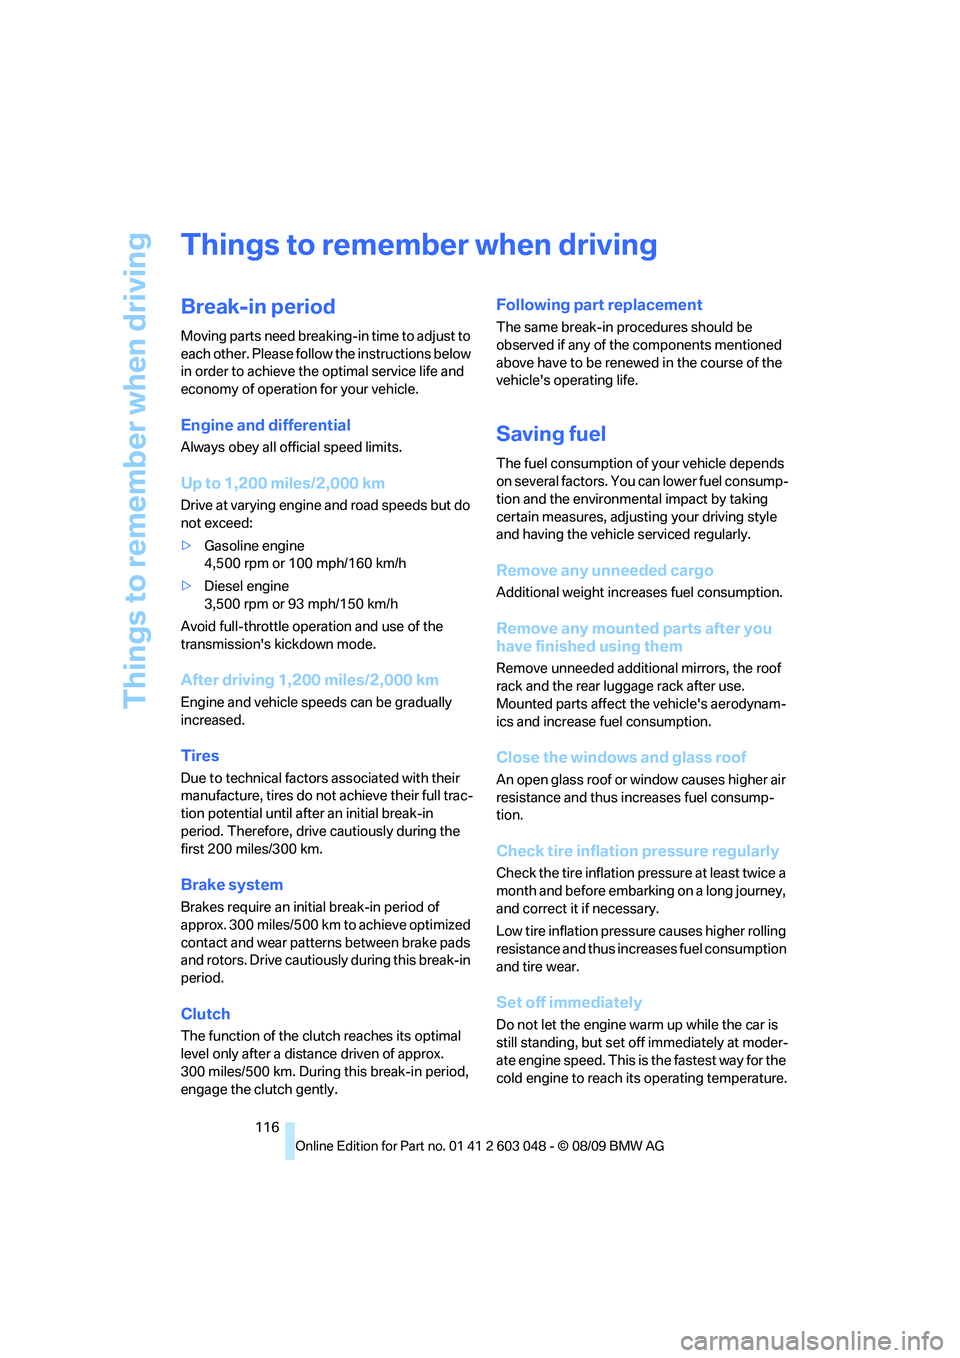 BMW 330D 2010  Owners Manual Things to remember when driving
116
Things to remember when driving
Break-in period
Moving parts need breaking-in time to adjust to 
each other. Please follow the instructions below 
in order to achie